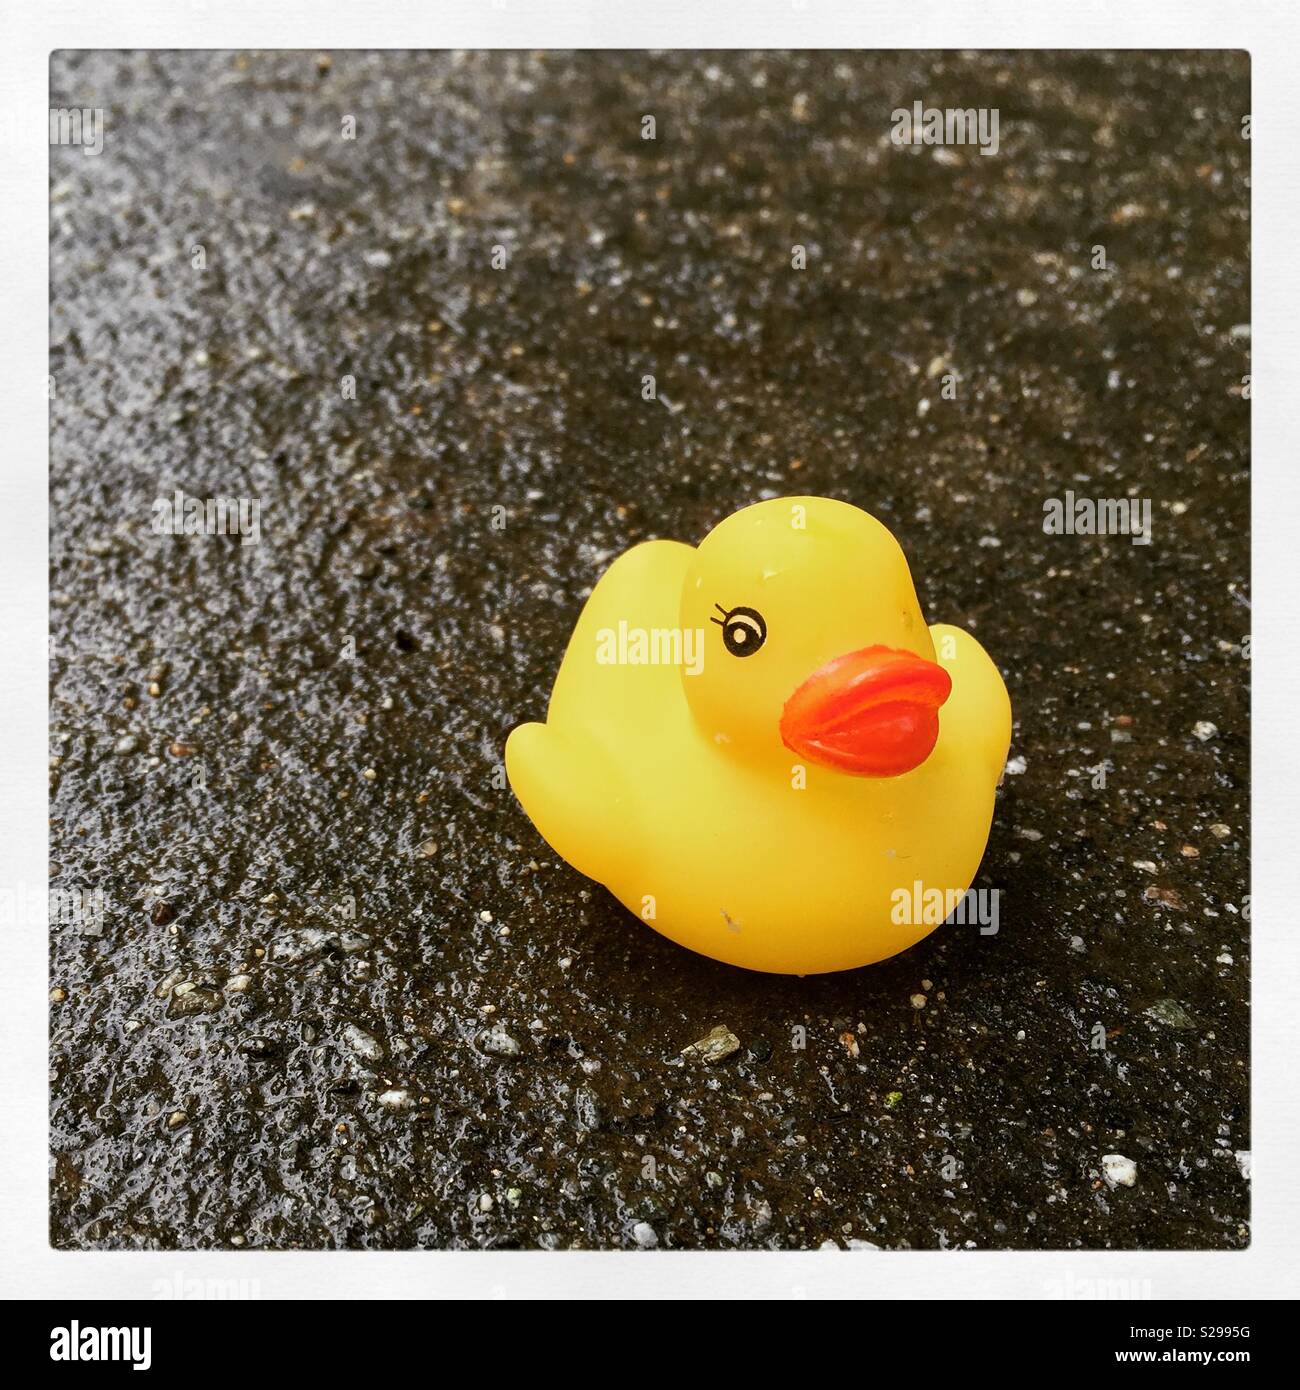 Rubber duckie Stock Photo